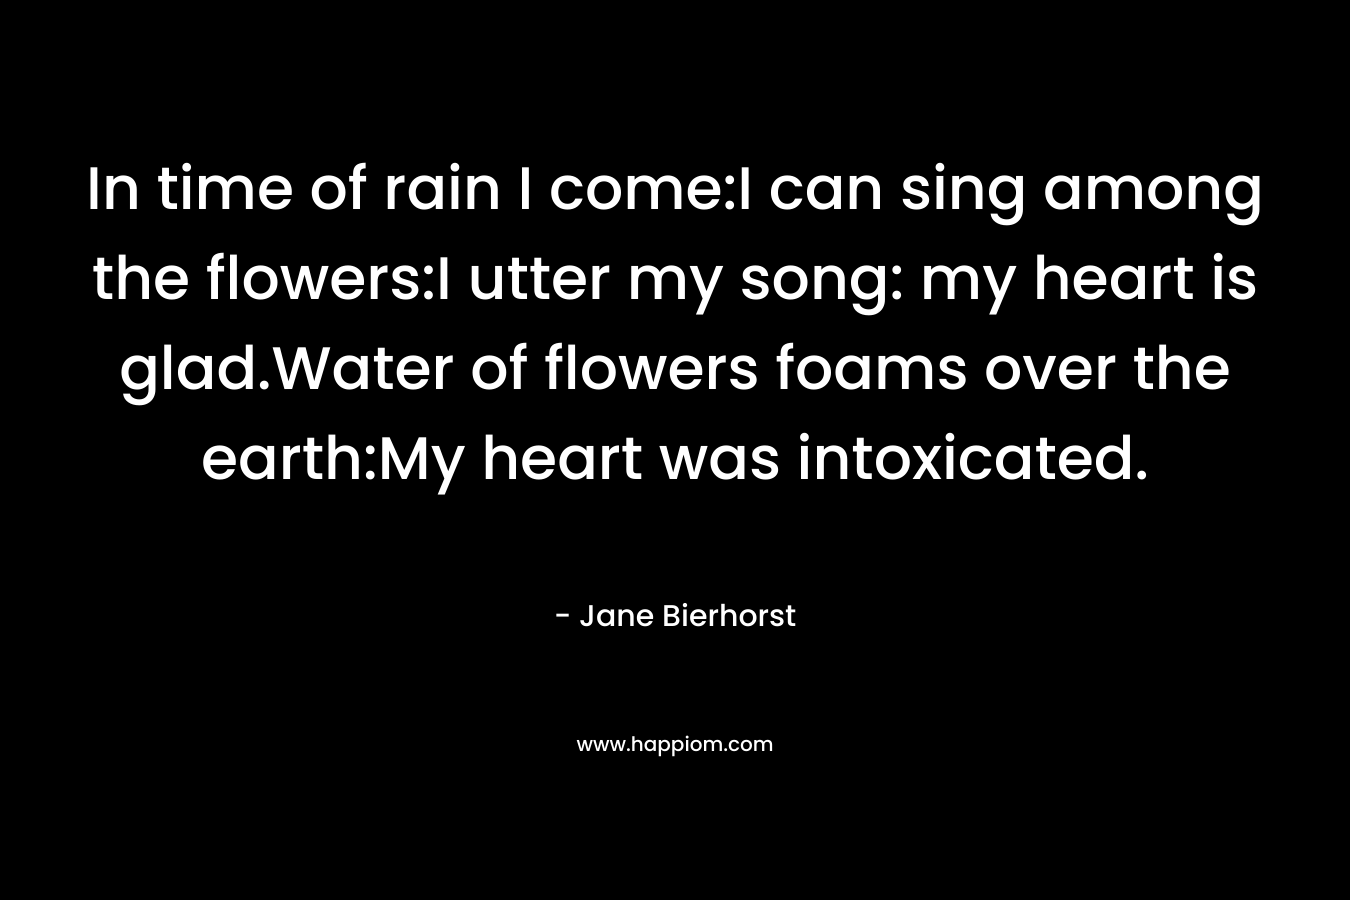 In time of rain I come:I can sing among the flowers:I utter my song: my heart is glad.Water of flowers foams over the earth:My heart was intoxicated.